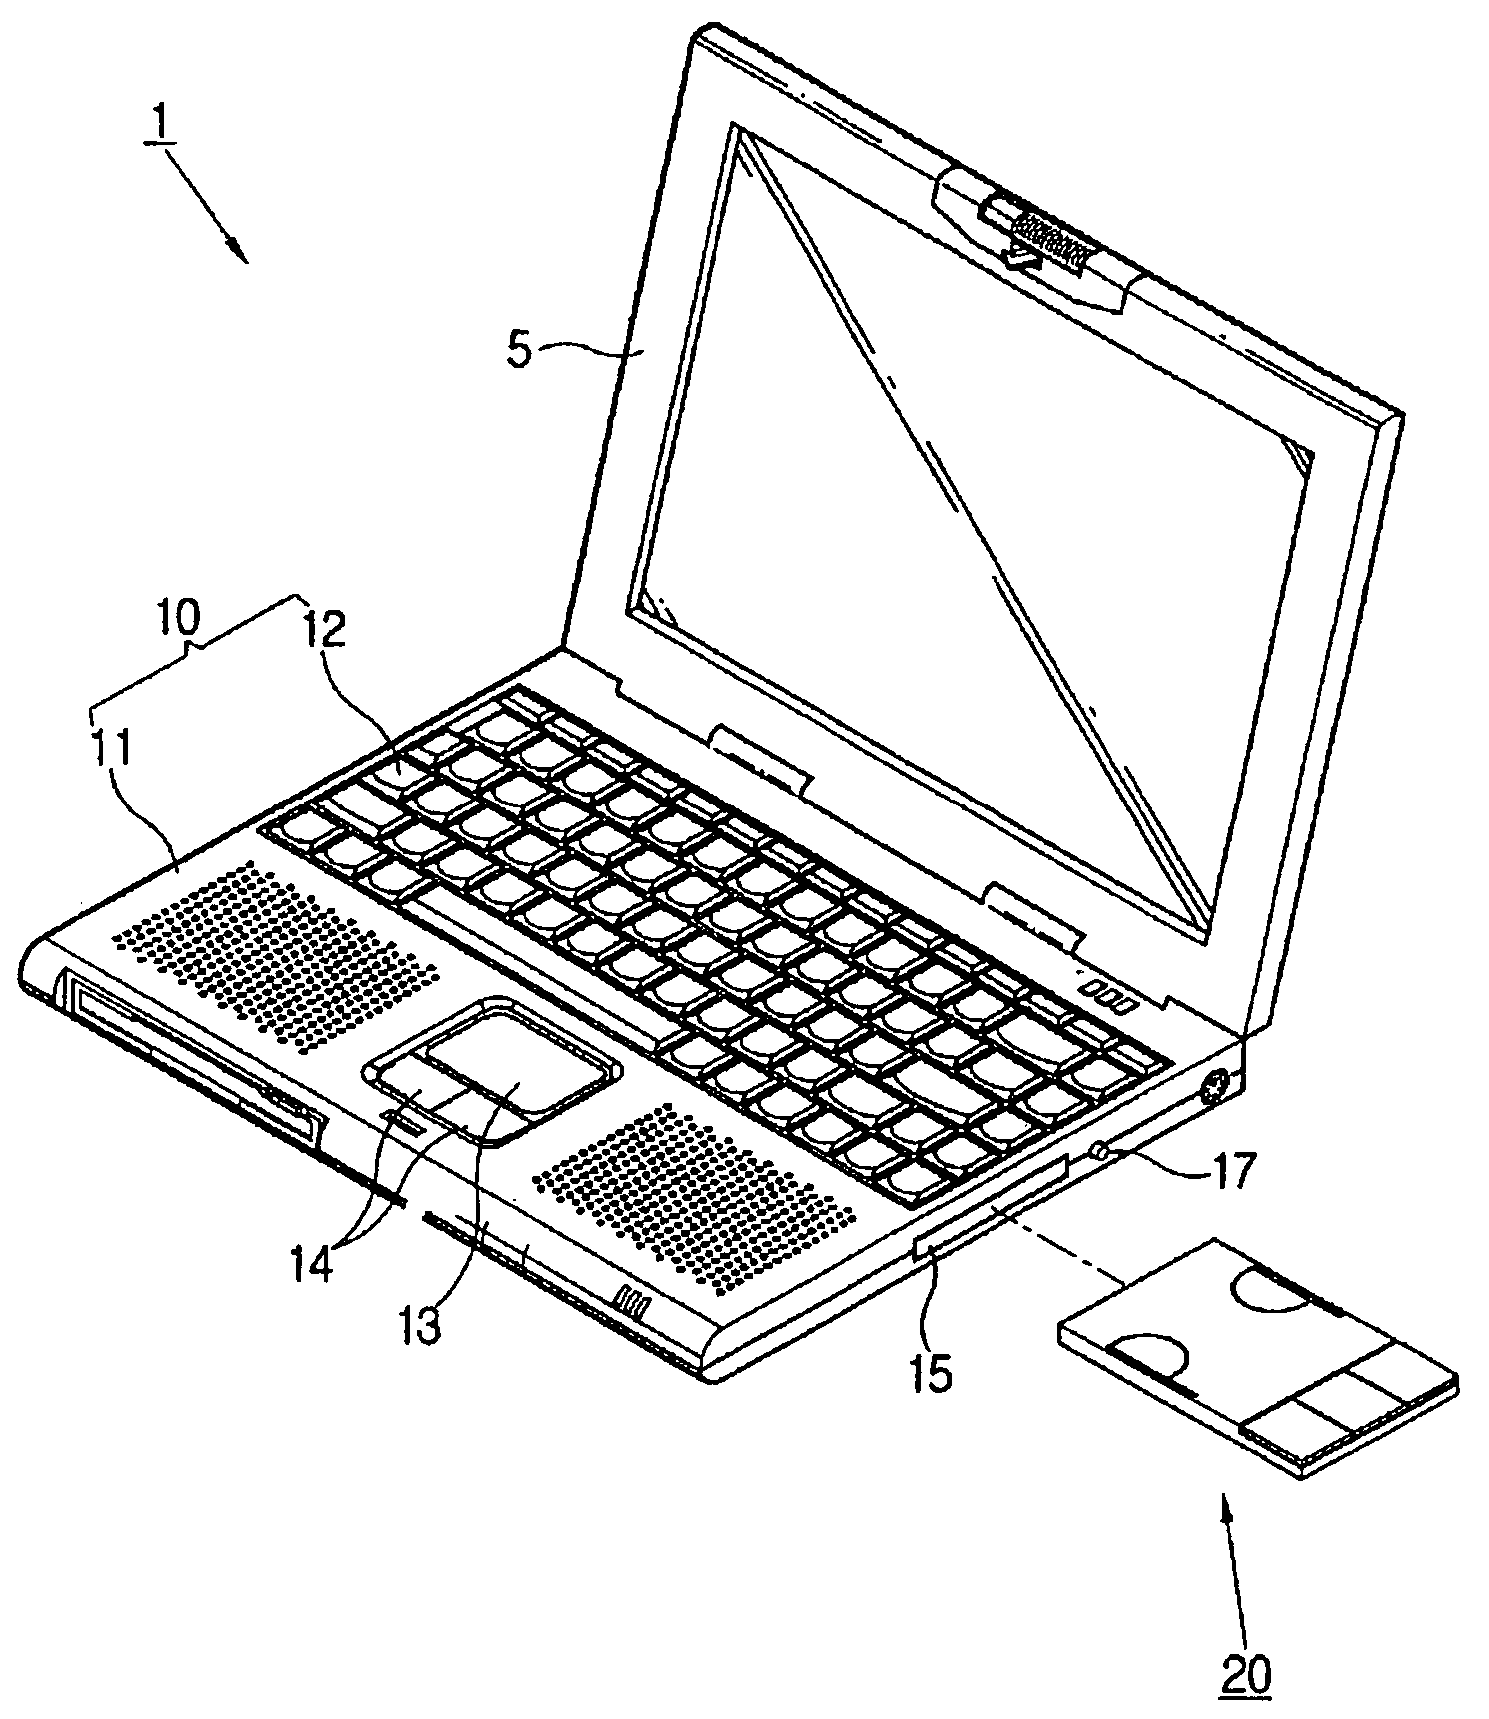 Mouse and portable computer with the same